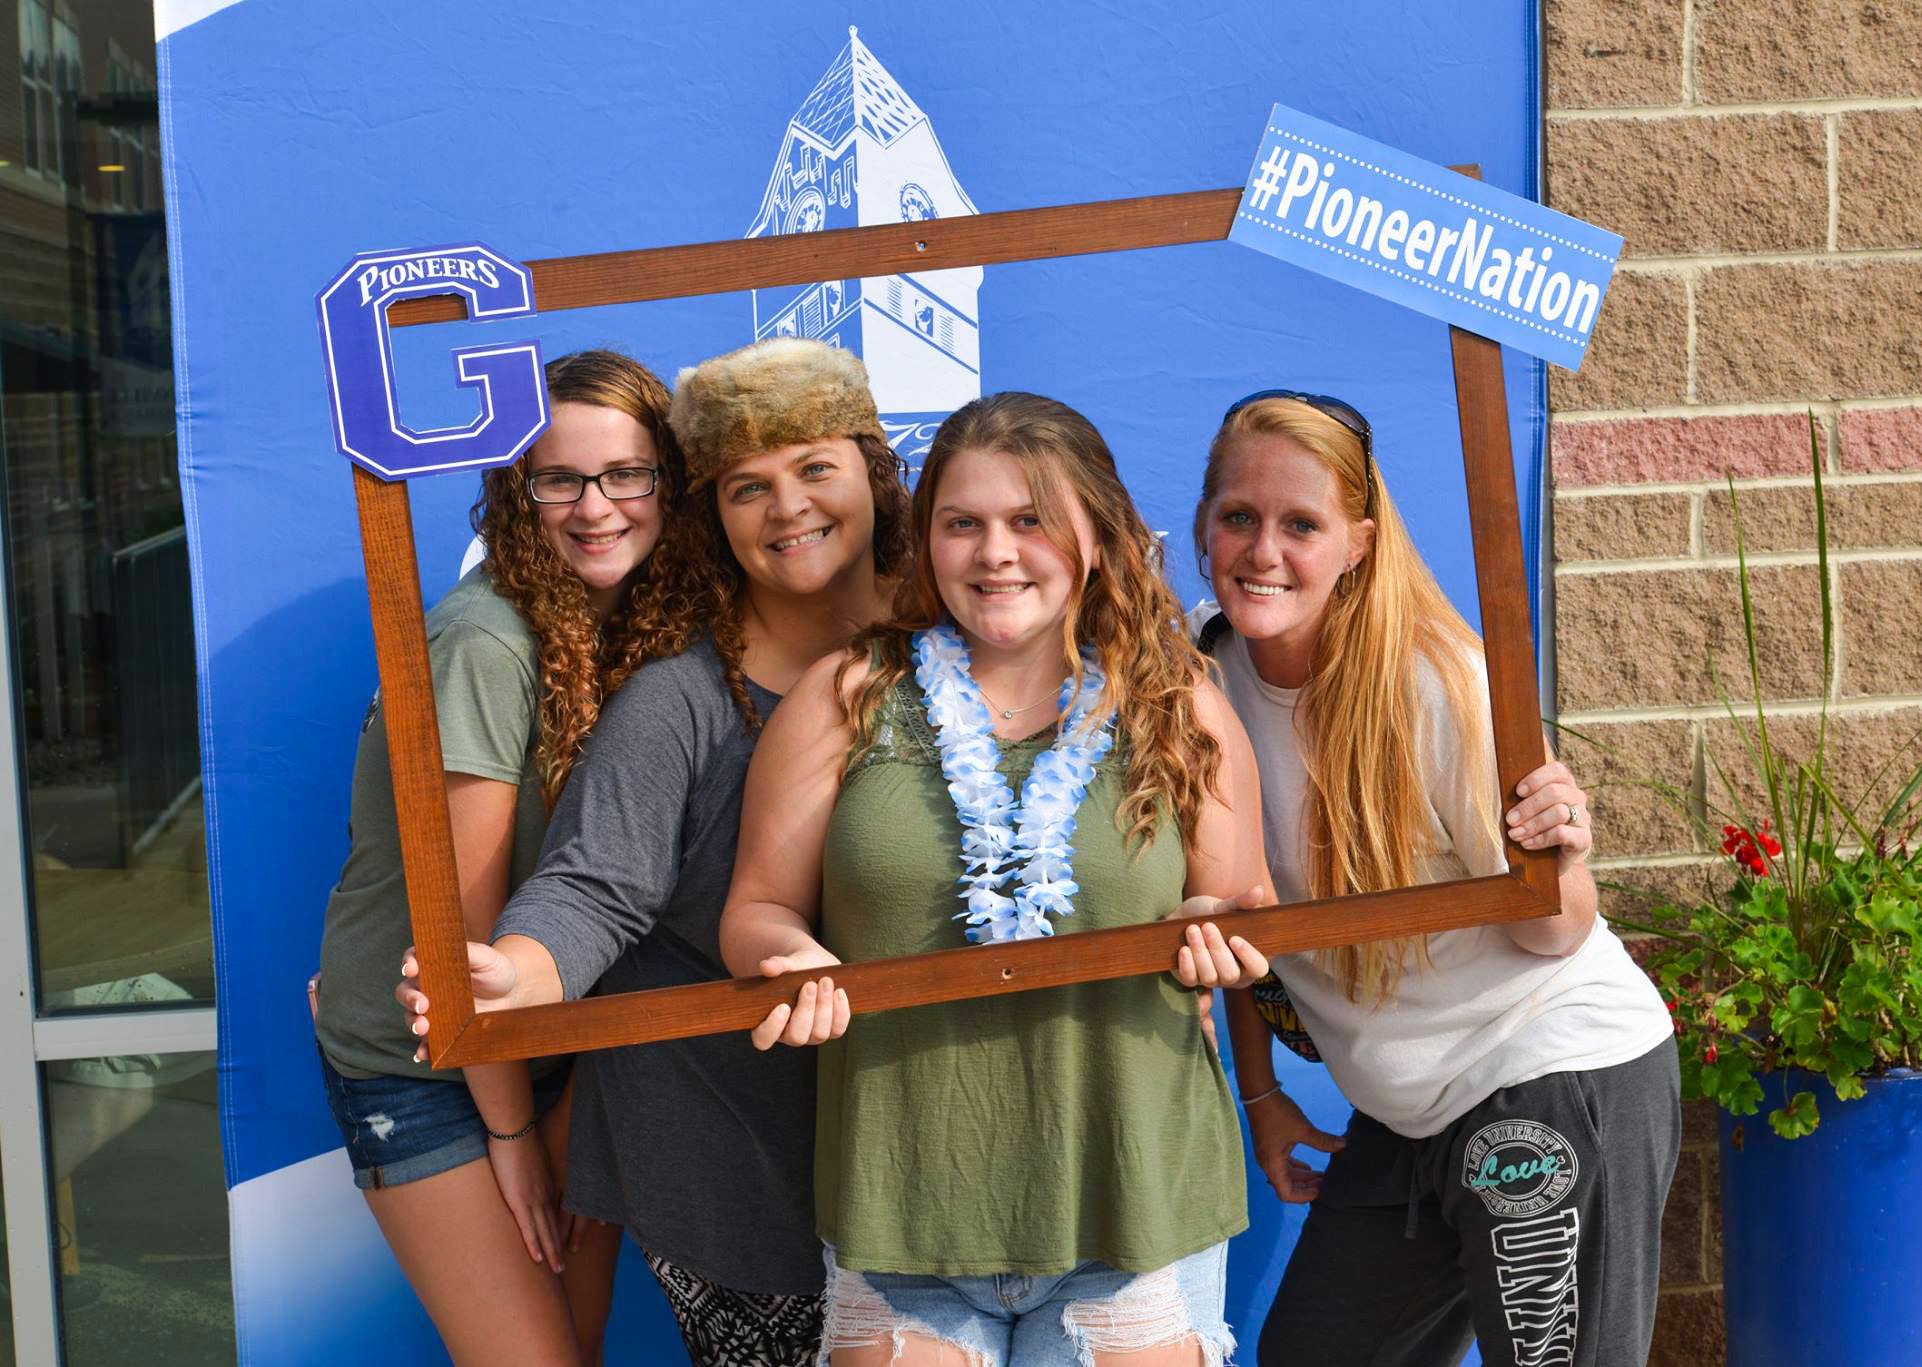 Four female students pose for a photo while holding an oversize wooden frame, decorated with messages like "Pioneer Nation" and "GSC Pioneers." Behind them is a large blue backdrop with the Glenville State logo on it.